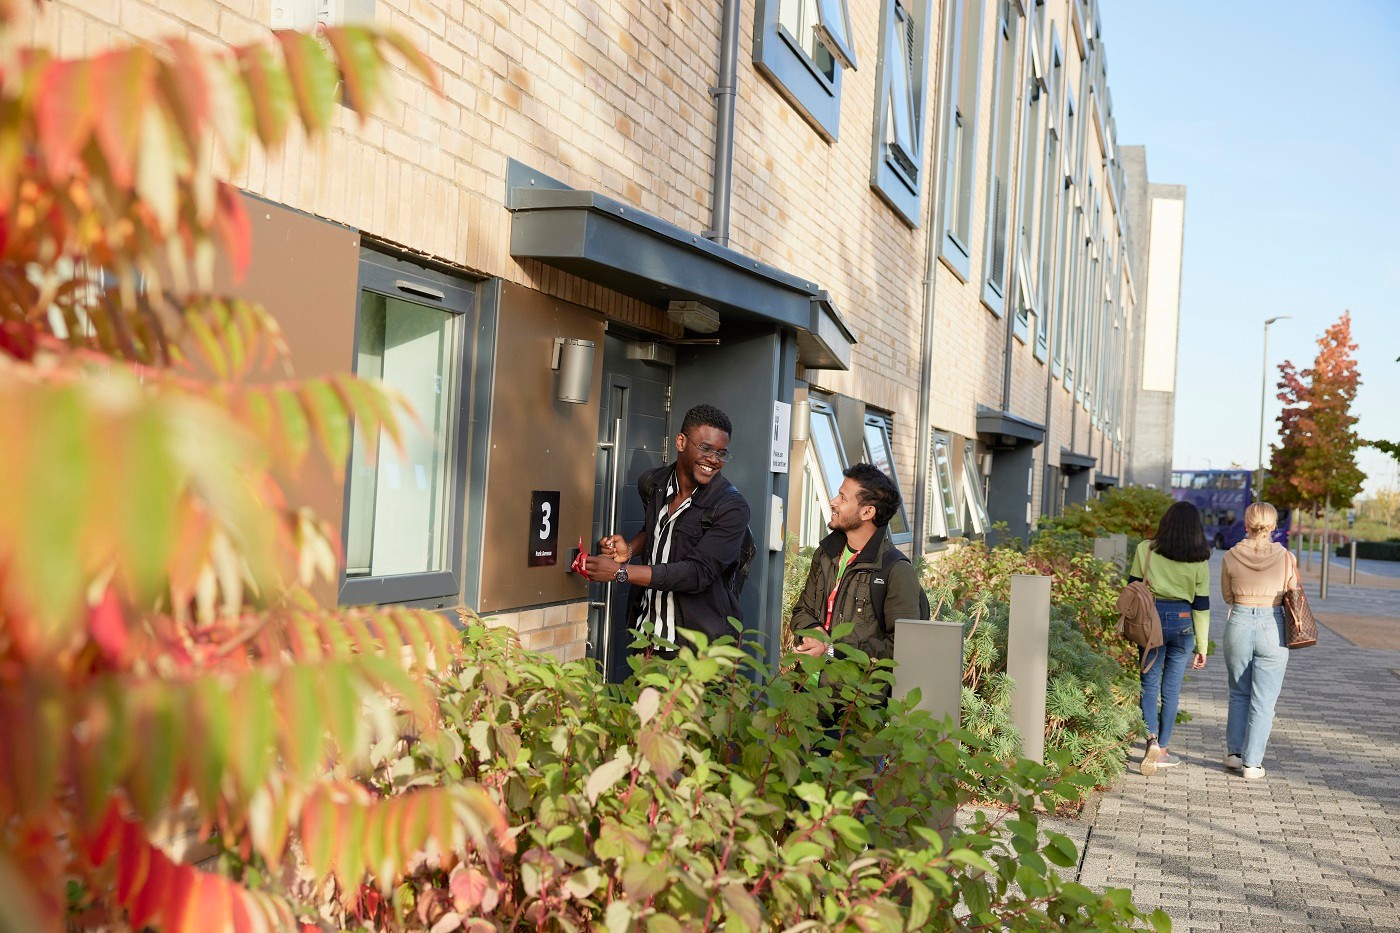 Two students are opening the front door of a town house at Waterside campus